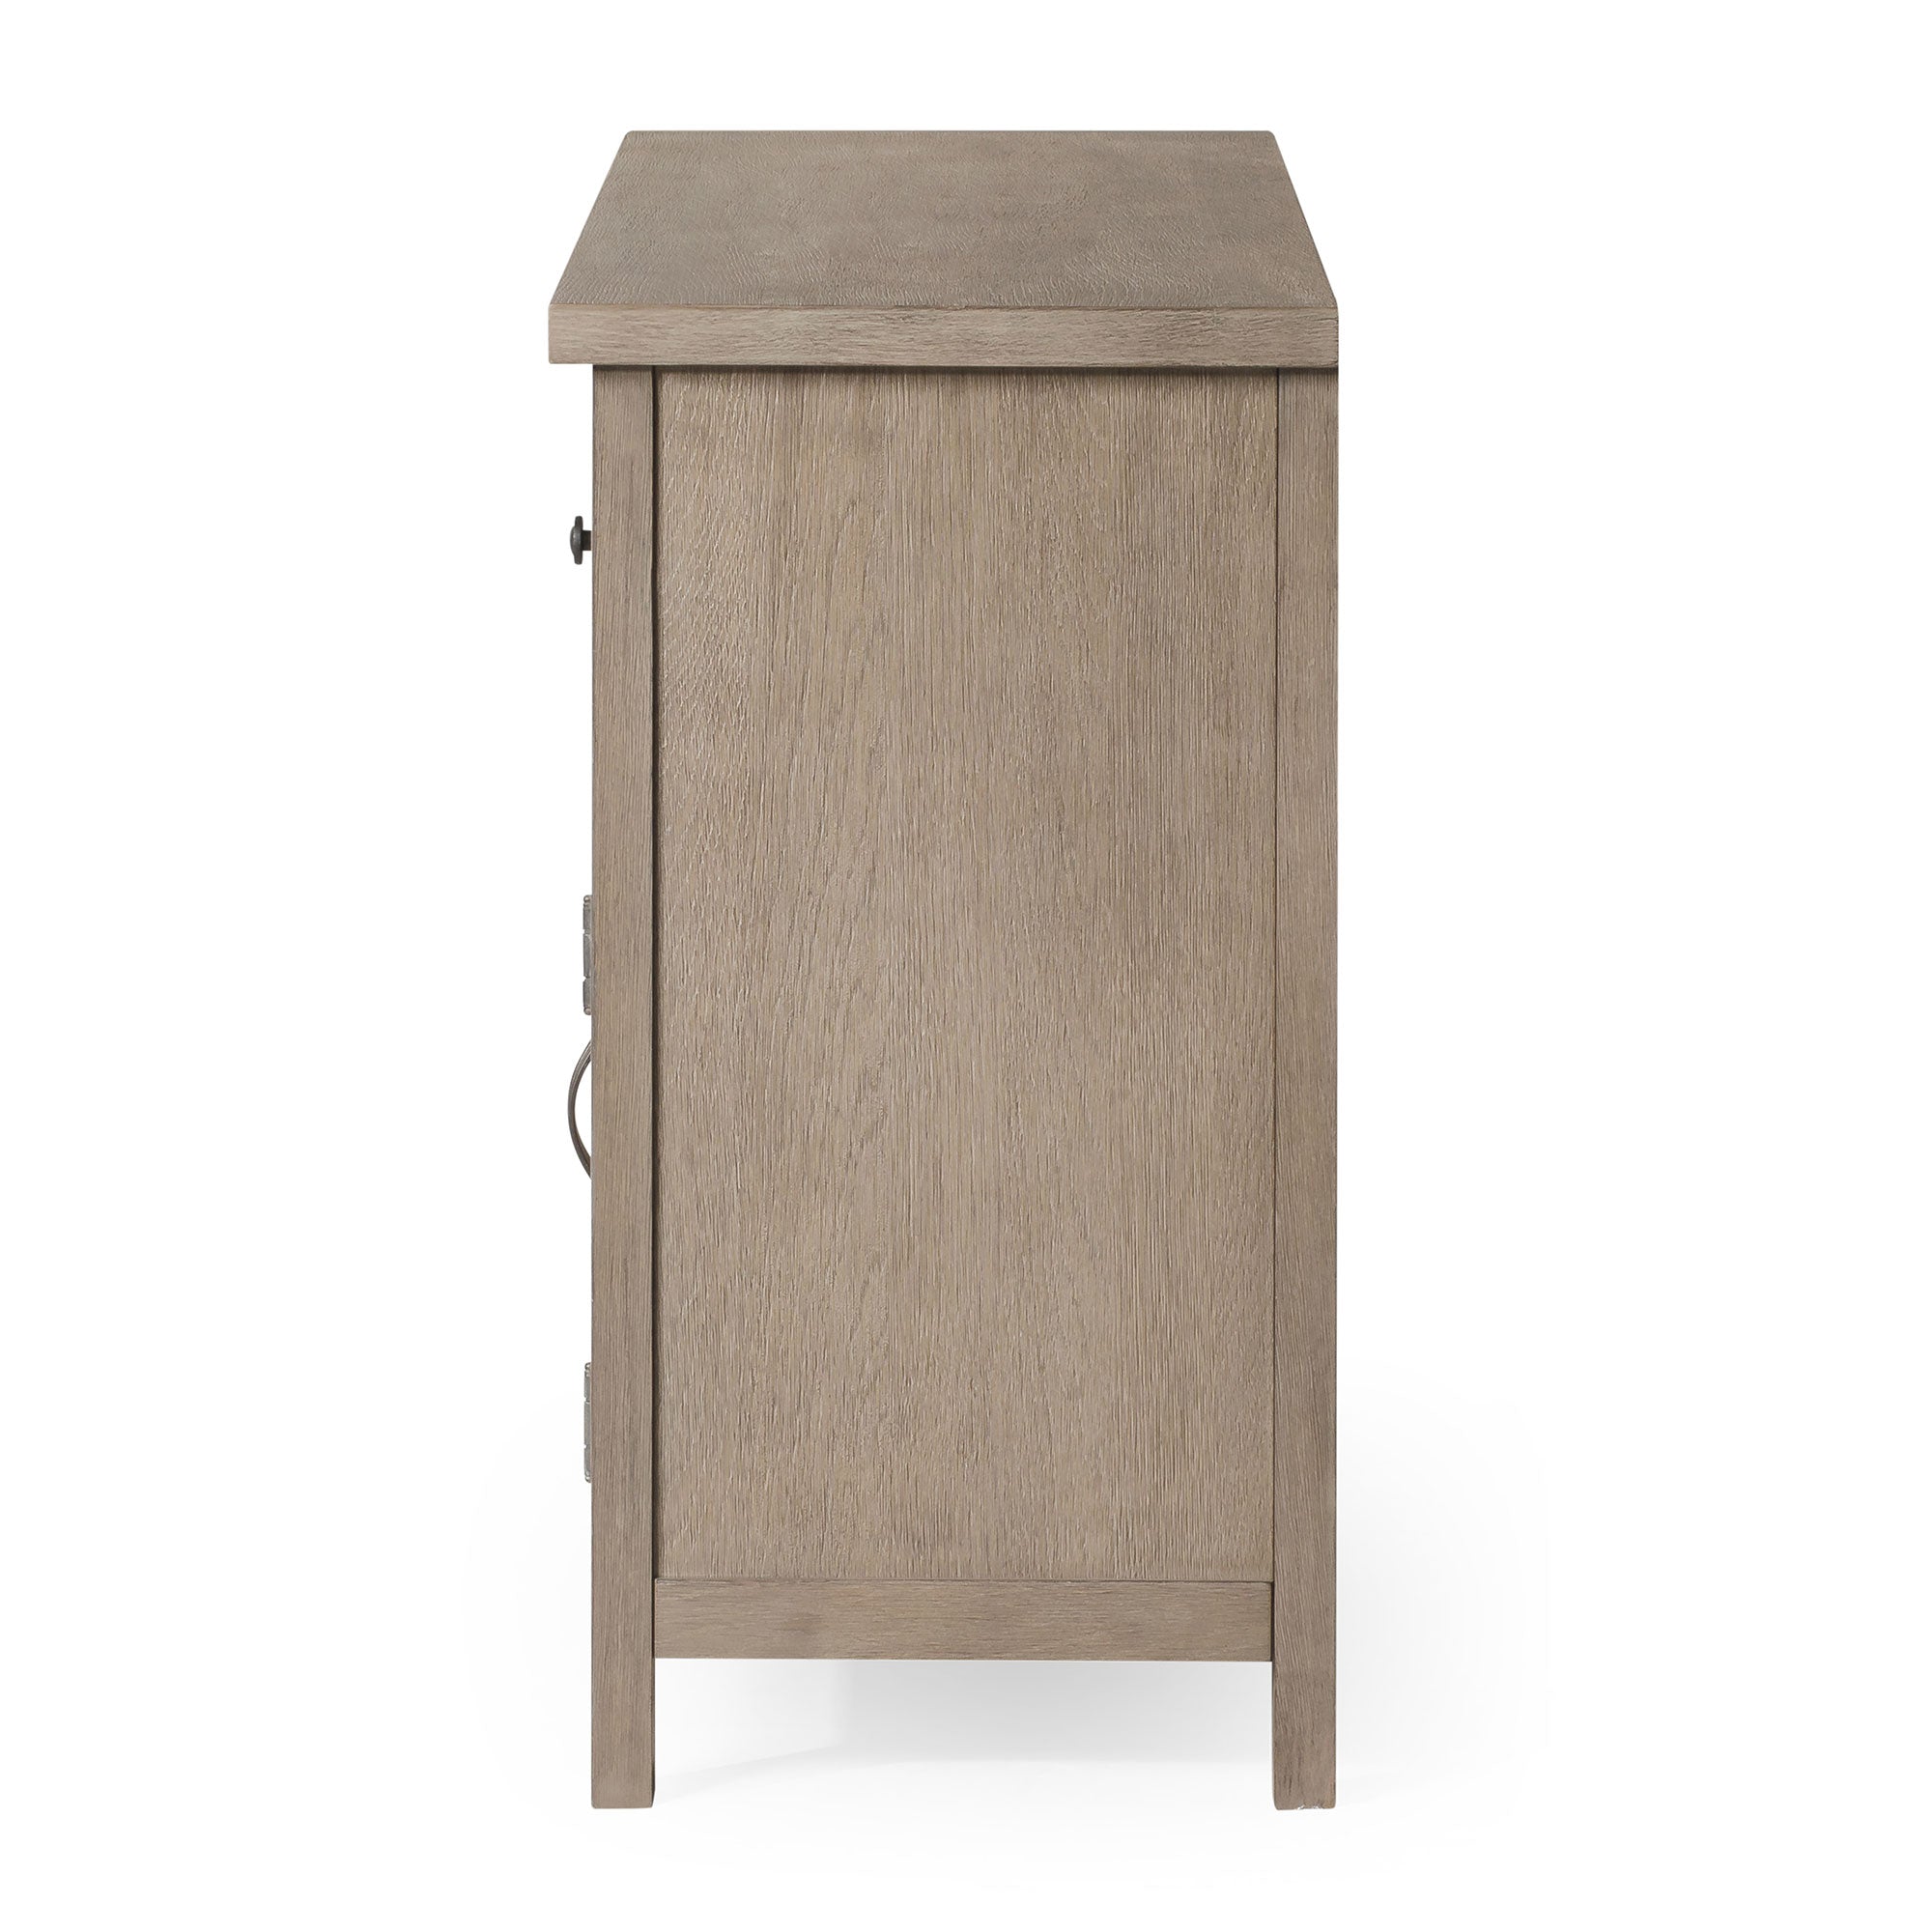 Felix Organic Wooden Sideboard in Weathered Grey Finish in Cabinets by Maven Lane